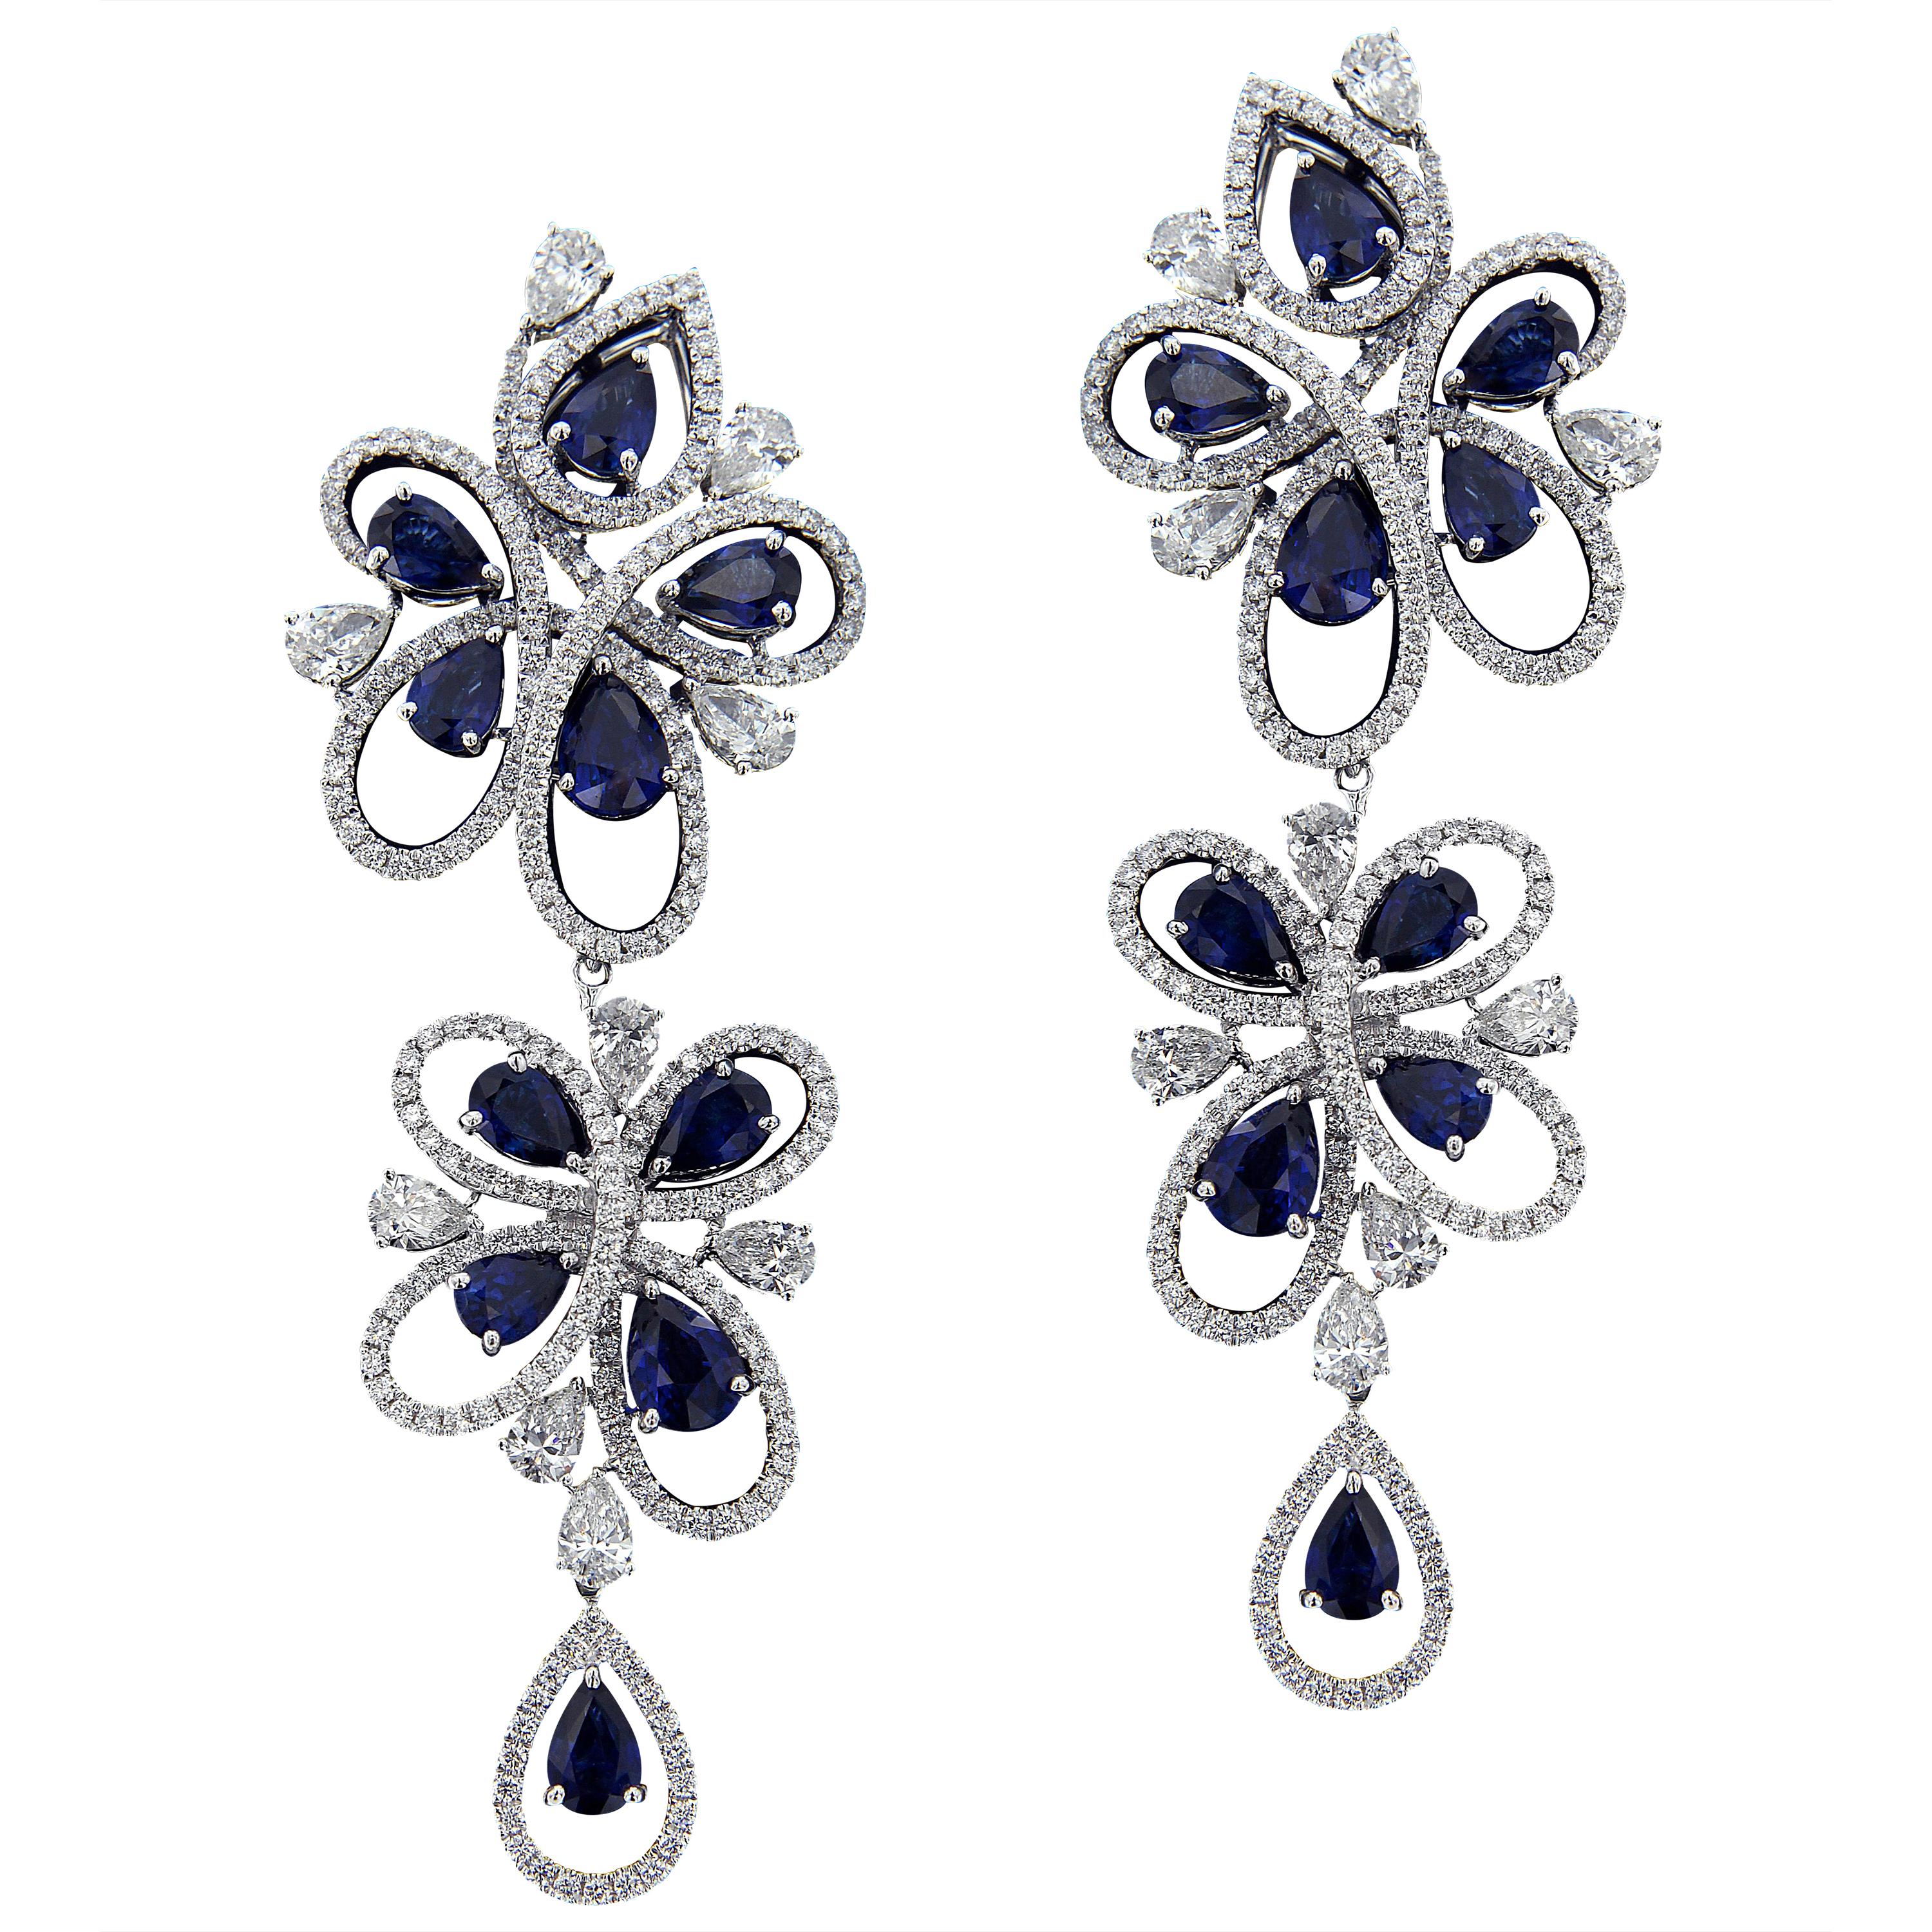 Charming 18 Karat White Gold, Diamond and Sapphire Earrings For Sale